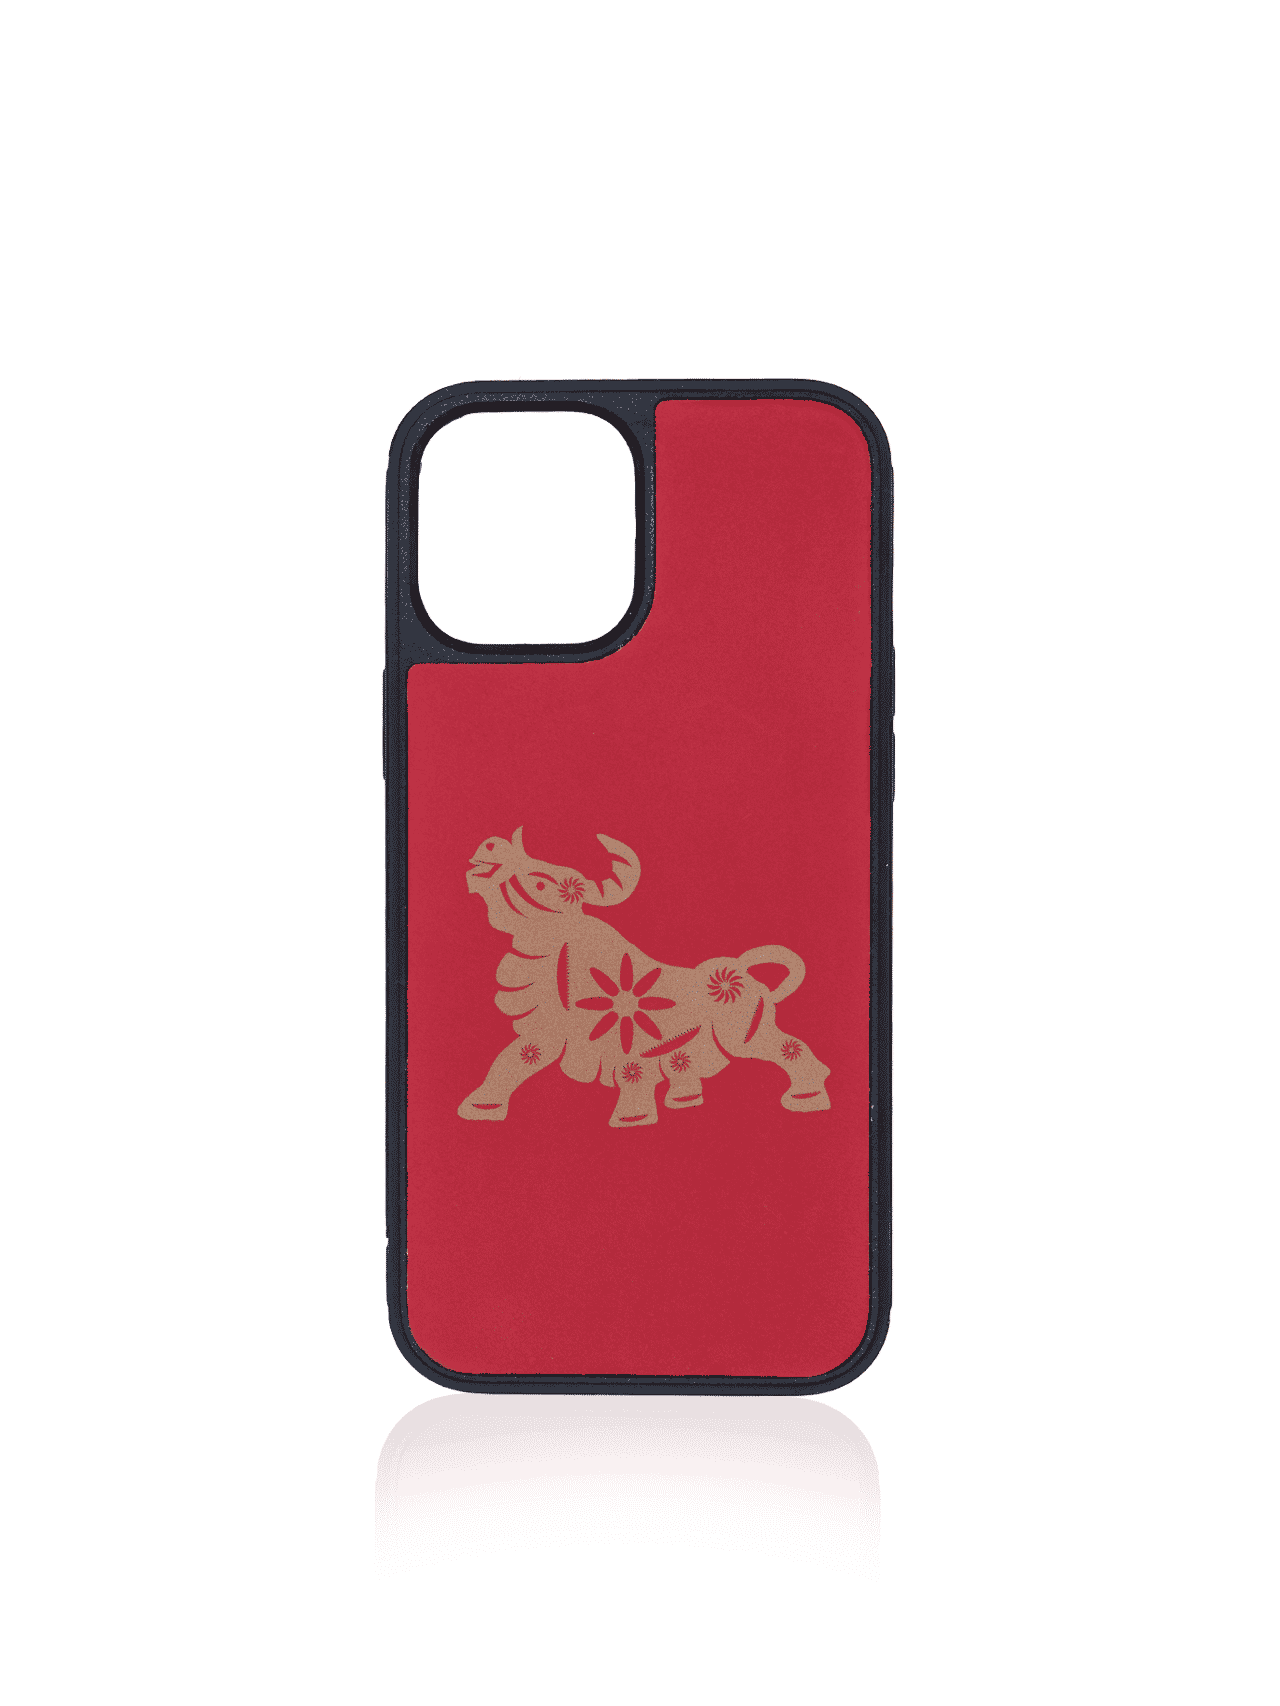 Iphone case red bull gold apple